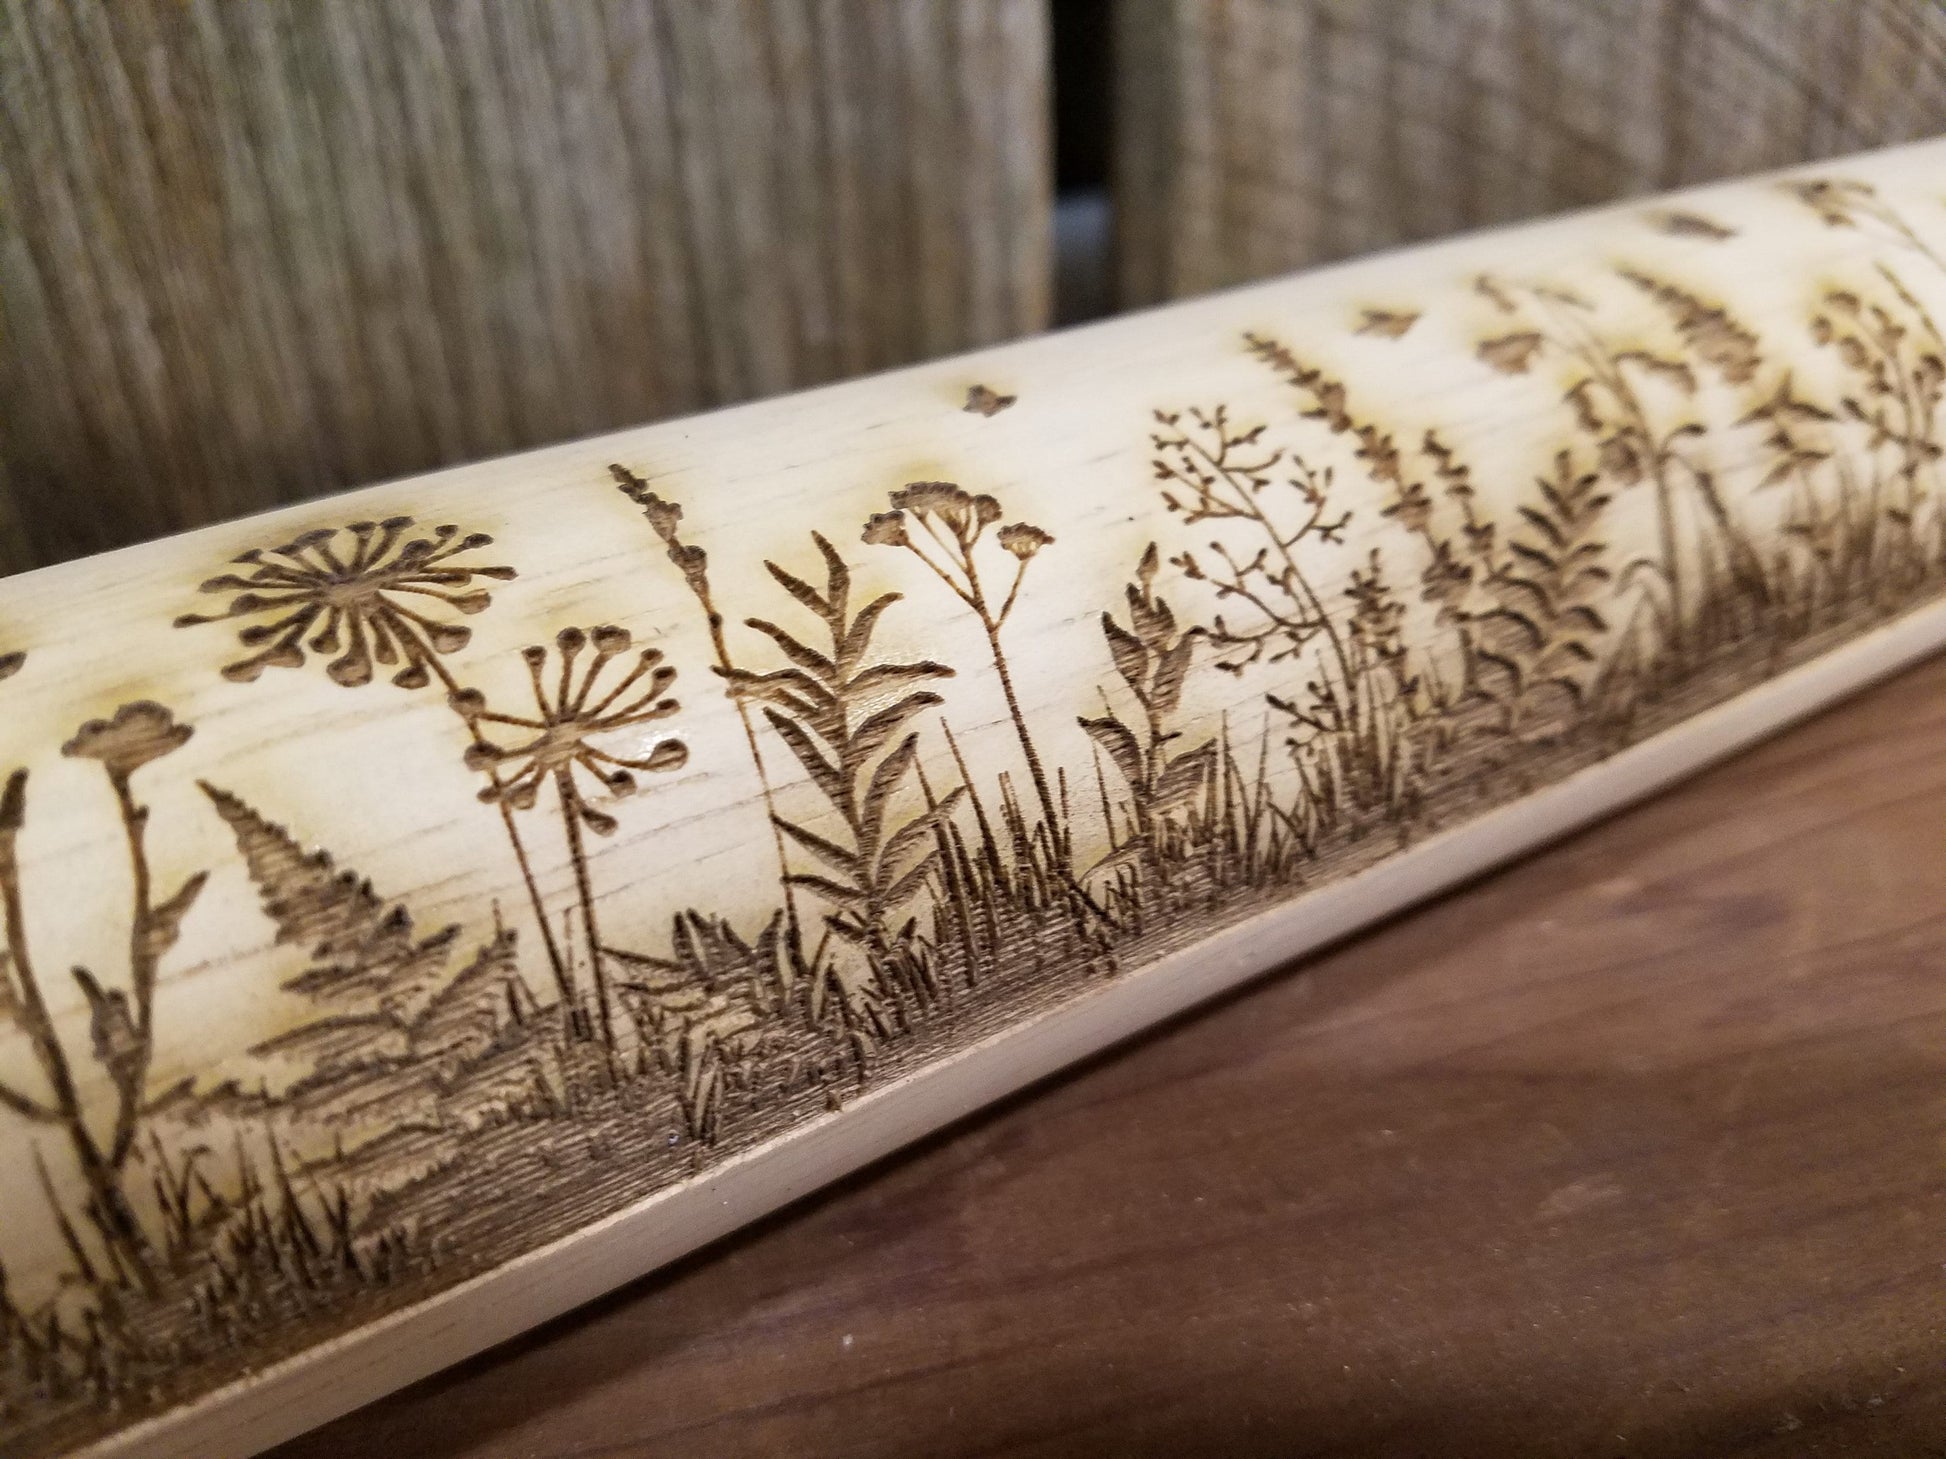 Wild Flower, Floral, Garden, Butterflies, 10 Inch Rolling Pin, Pie Crust, Gift, Embossed, pottery, pottery texture roller, cookie stamp